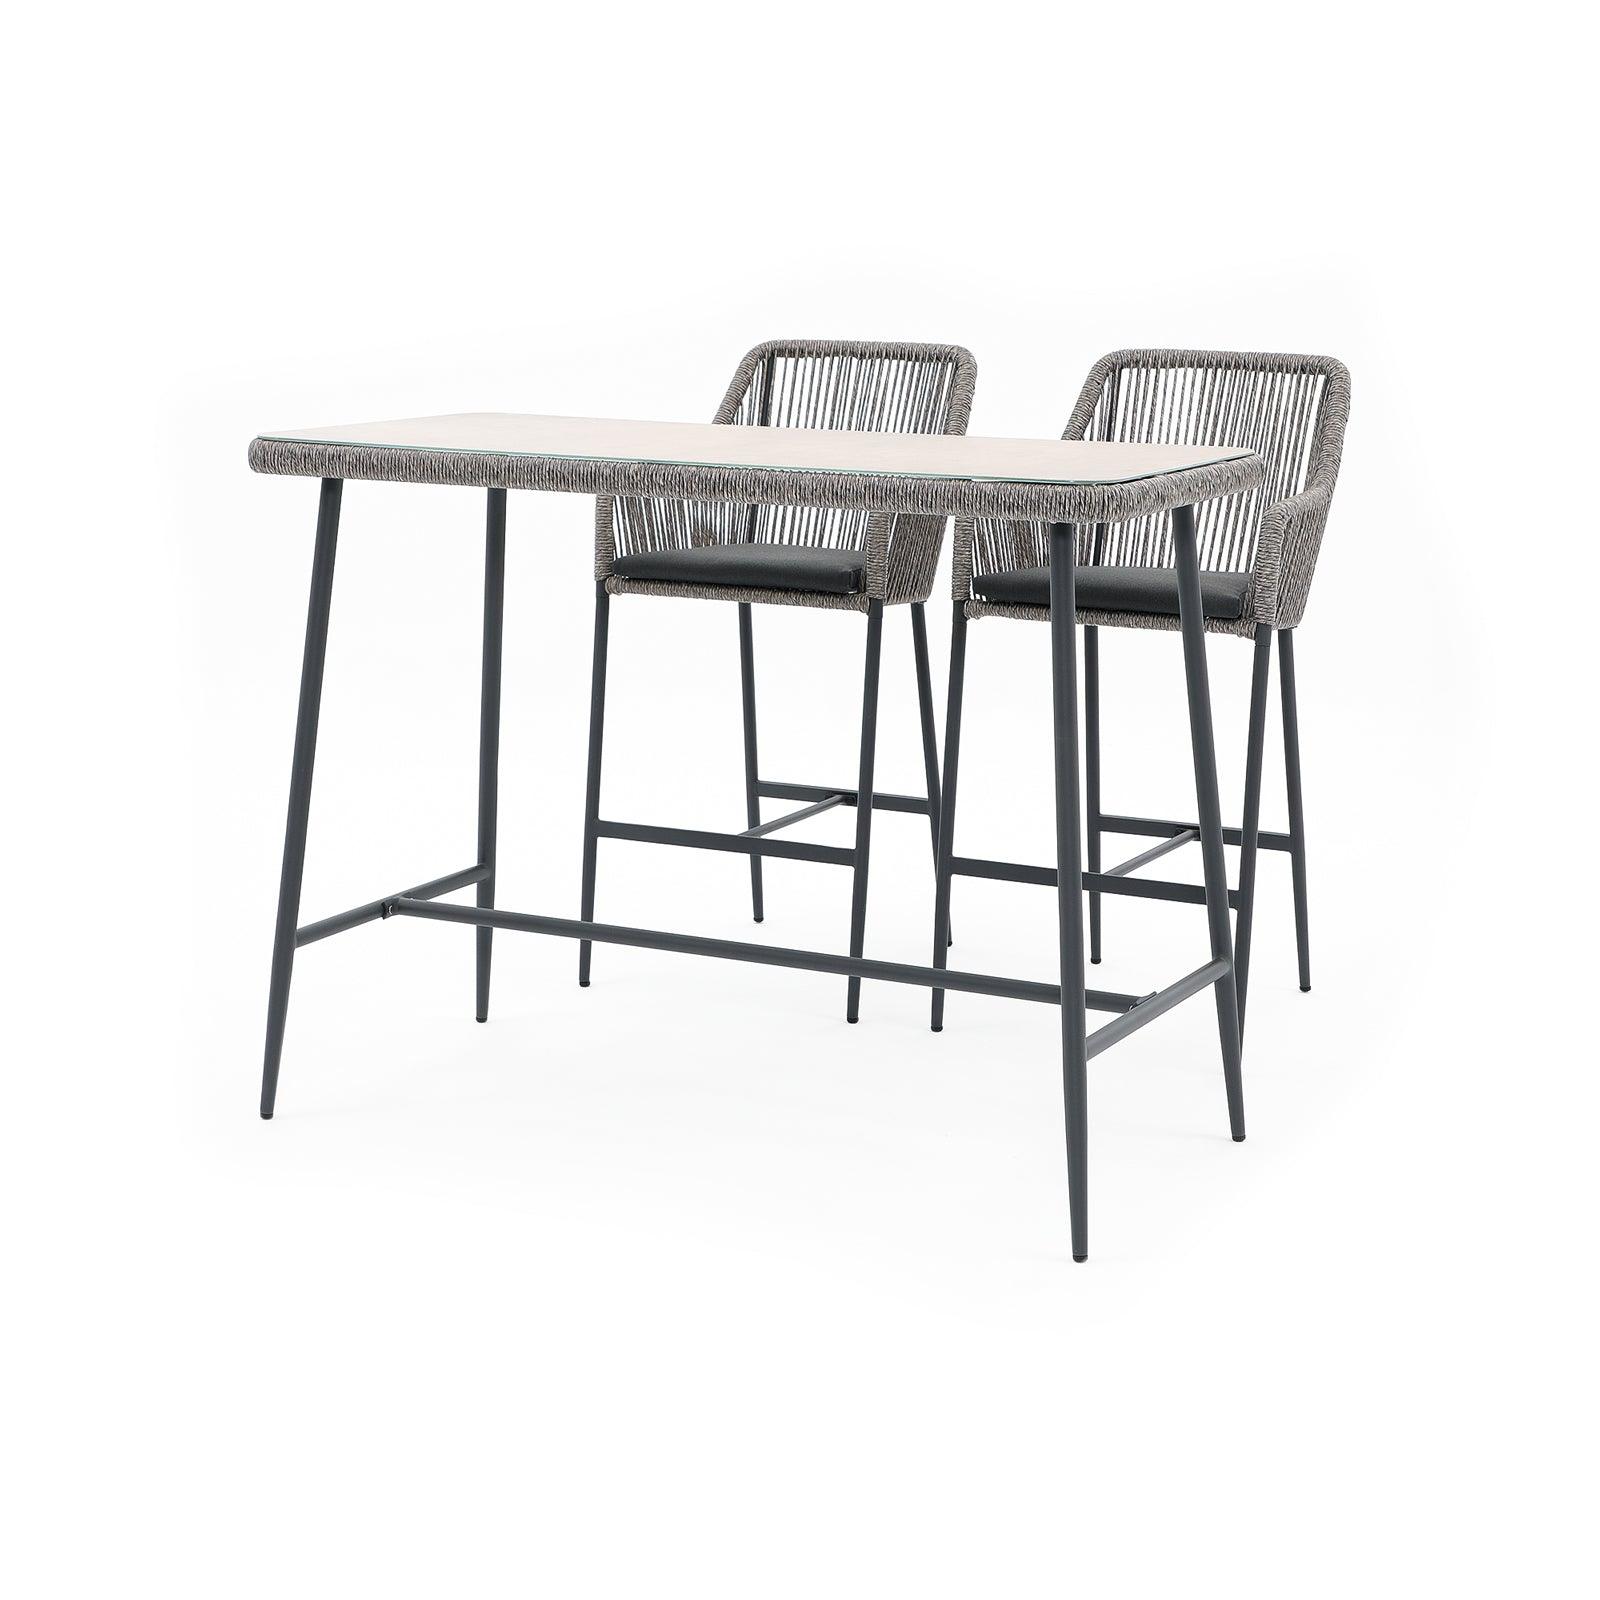 Hallerbos Rectangular Bar Height Table with Tempered Glass Top